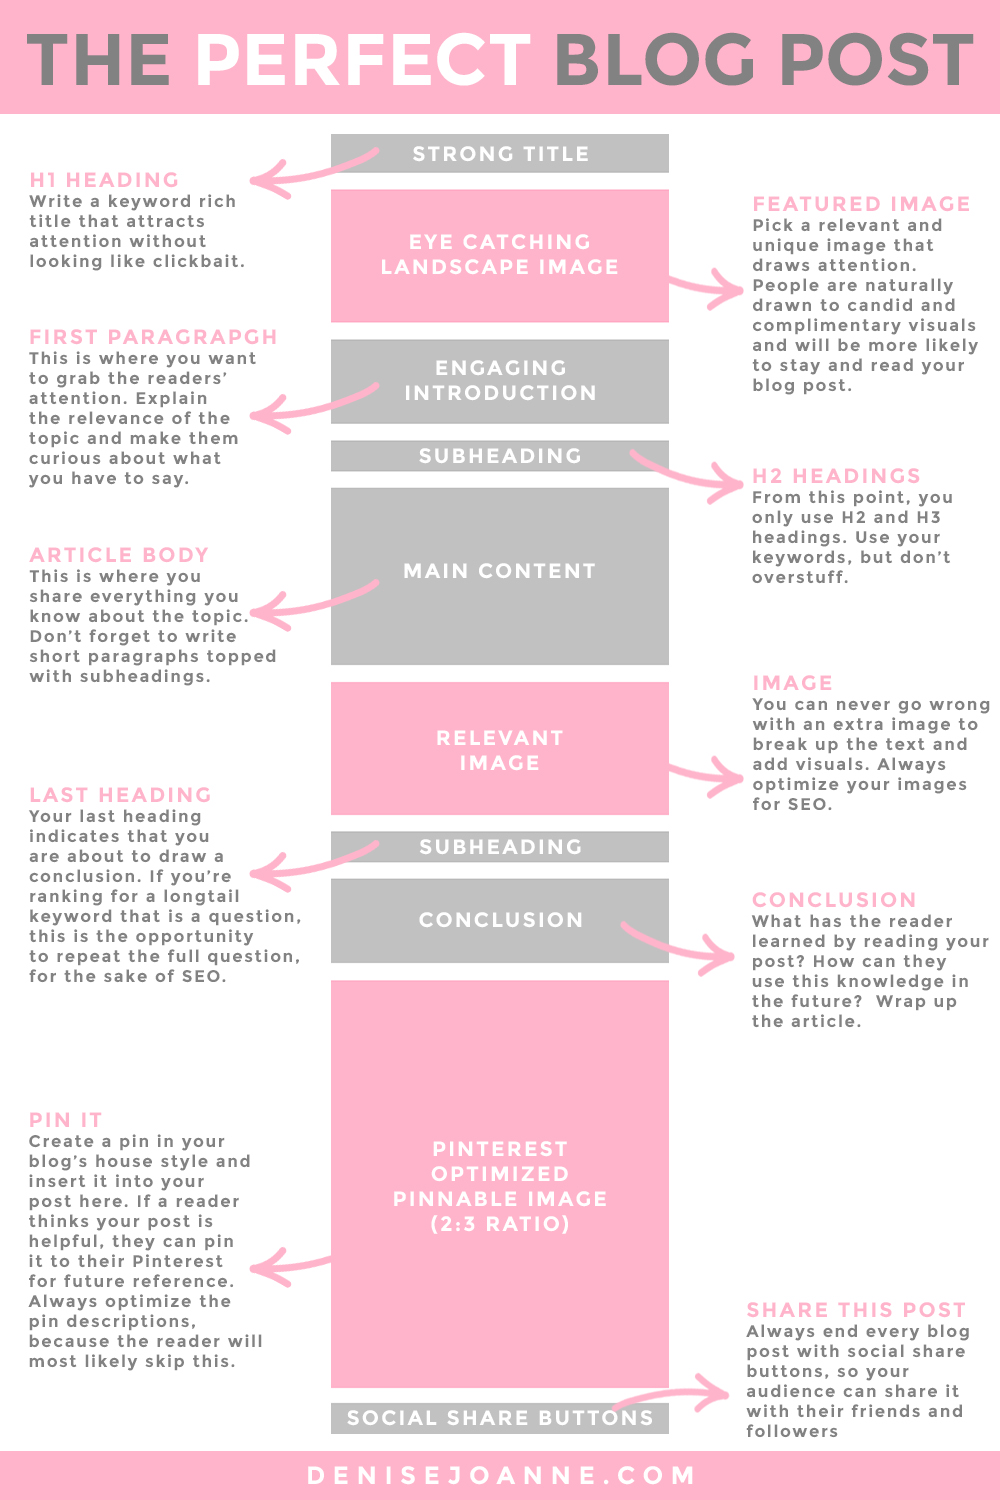 A pinnable image, specially made for people to pin this post to their Pinterest boards. It shows a visual of the anatomy of the perfect blog.